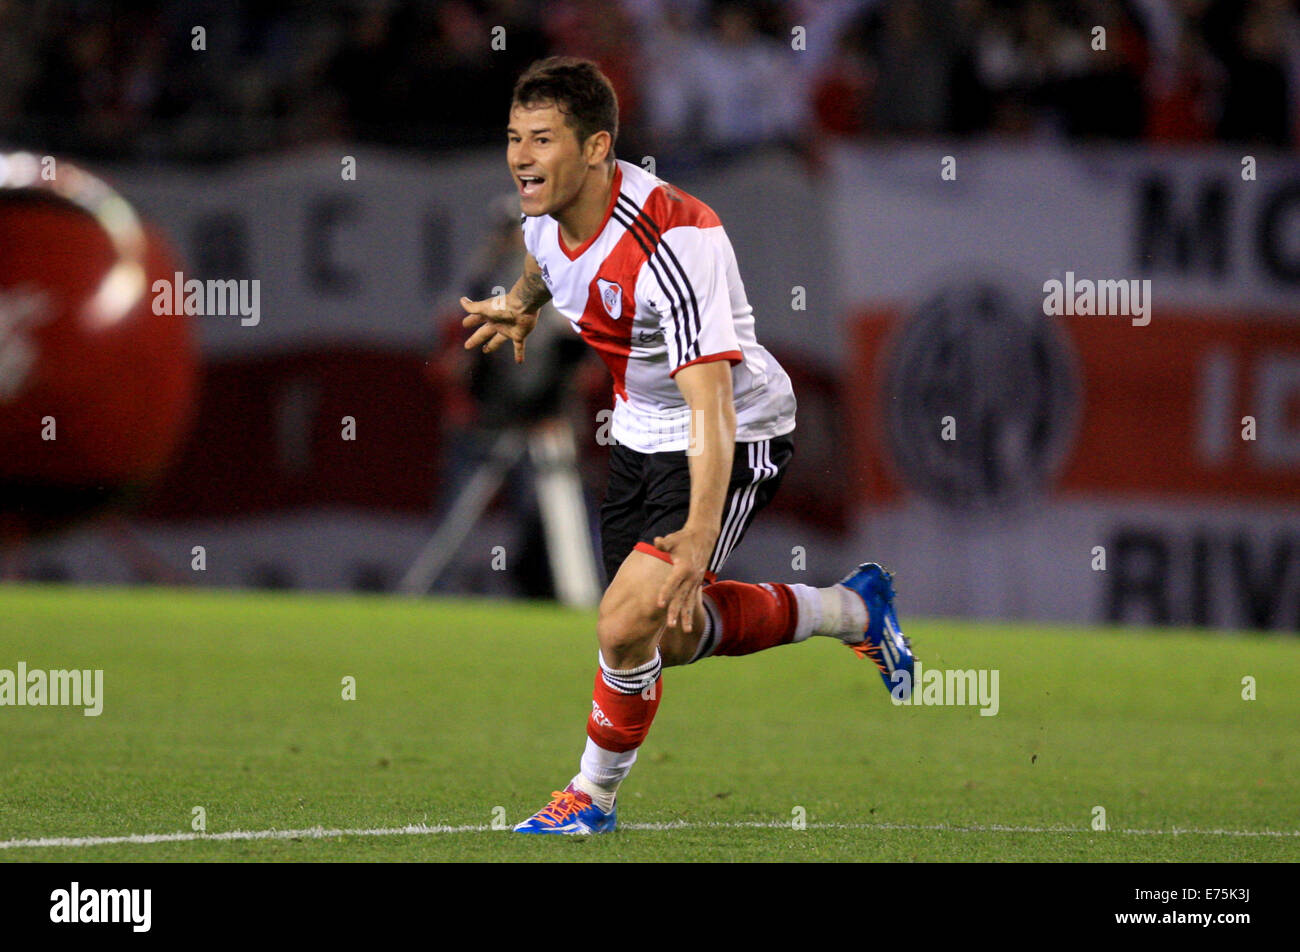 Buenos Aires, Argentina. 7th Sep, 2014. Rodrigo Mora of River Plate celebrates a scoring during the match of the Argentinean First Division against Tigre in the Antonio Vespucio Liberti Stadium, in Buenos Aires, Argentina, on Sept. 7, 2014. © Martin Zabala/Xinhua/Alamy Live News Stock Photo